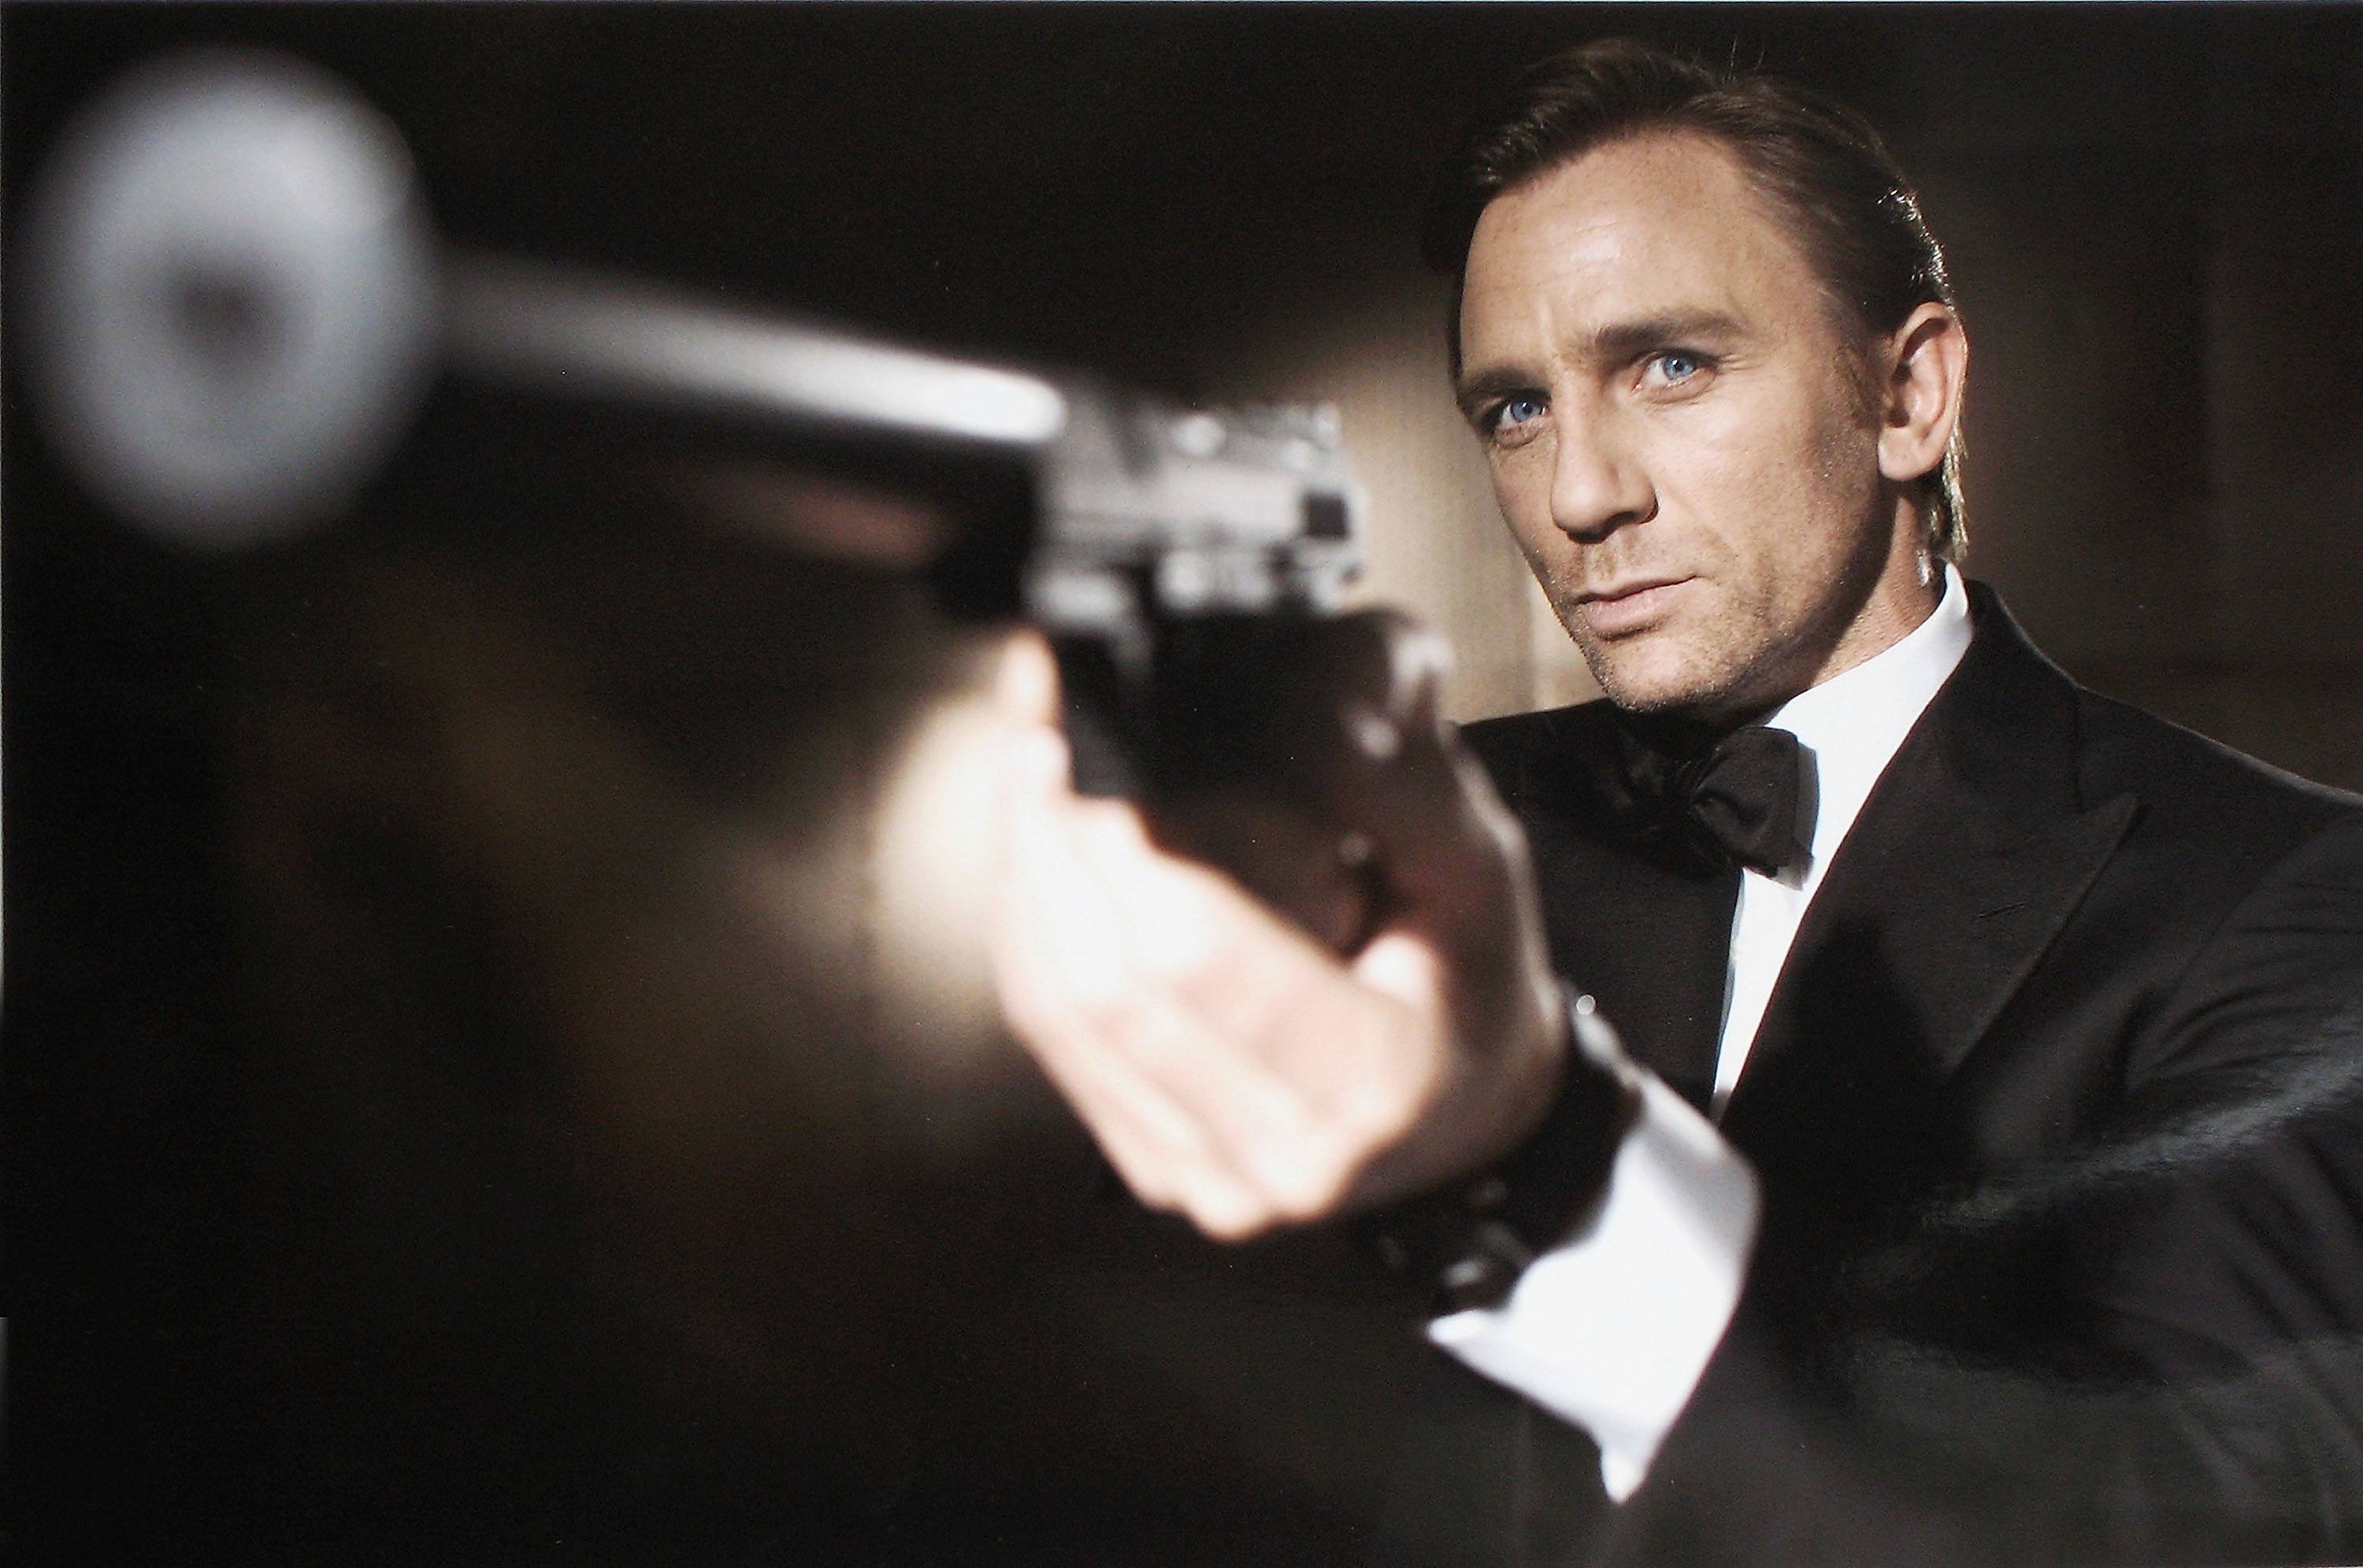 This Website Will Pay You $1000 to Watch all 24 James Bond Movies